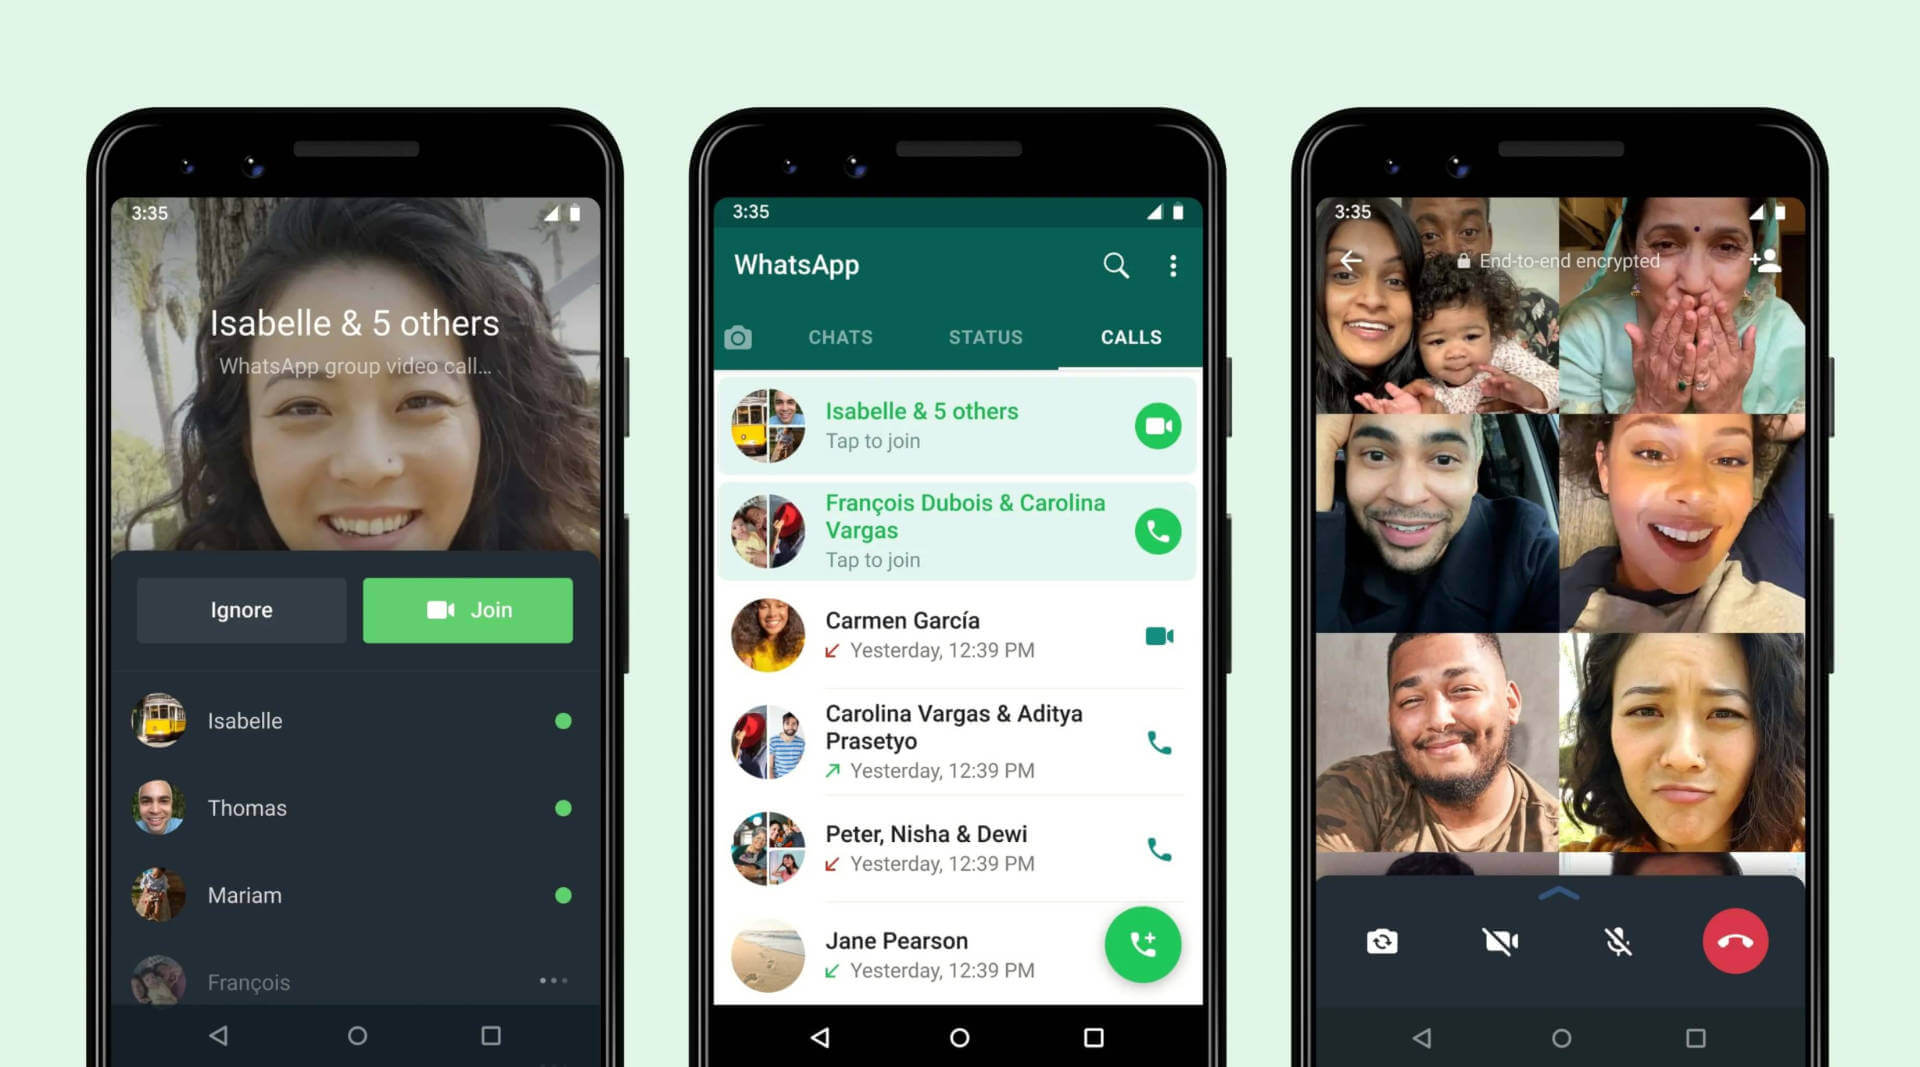 Users will now be able to join, drop and join WhatsApp Group calls